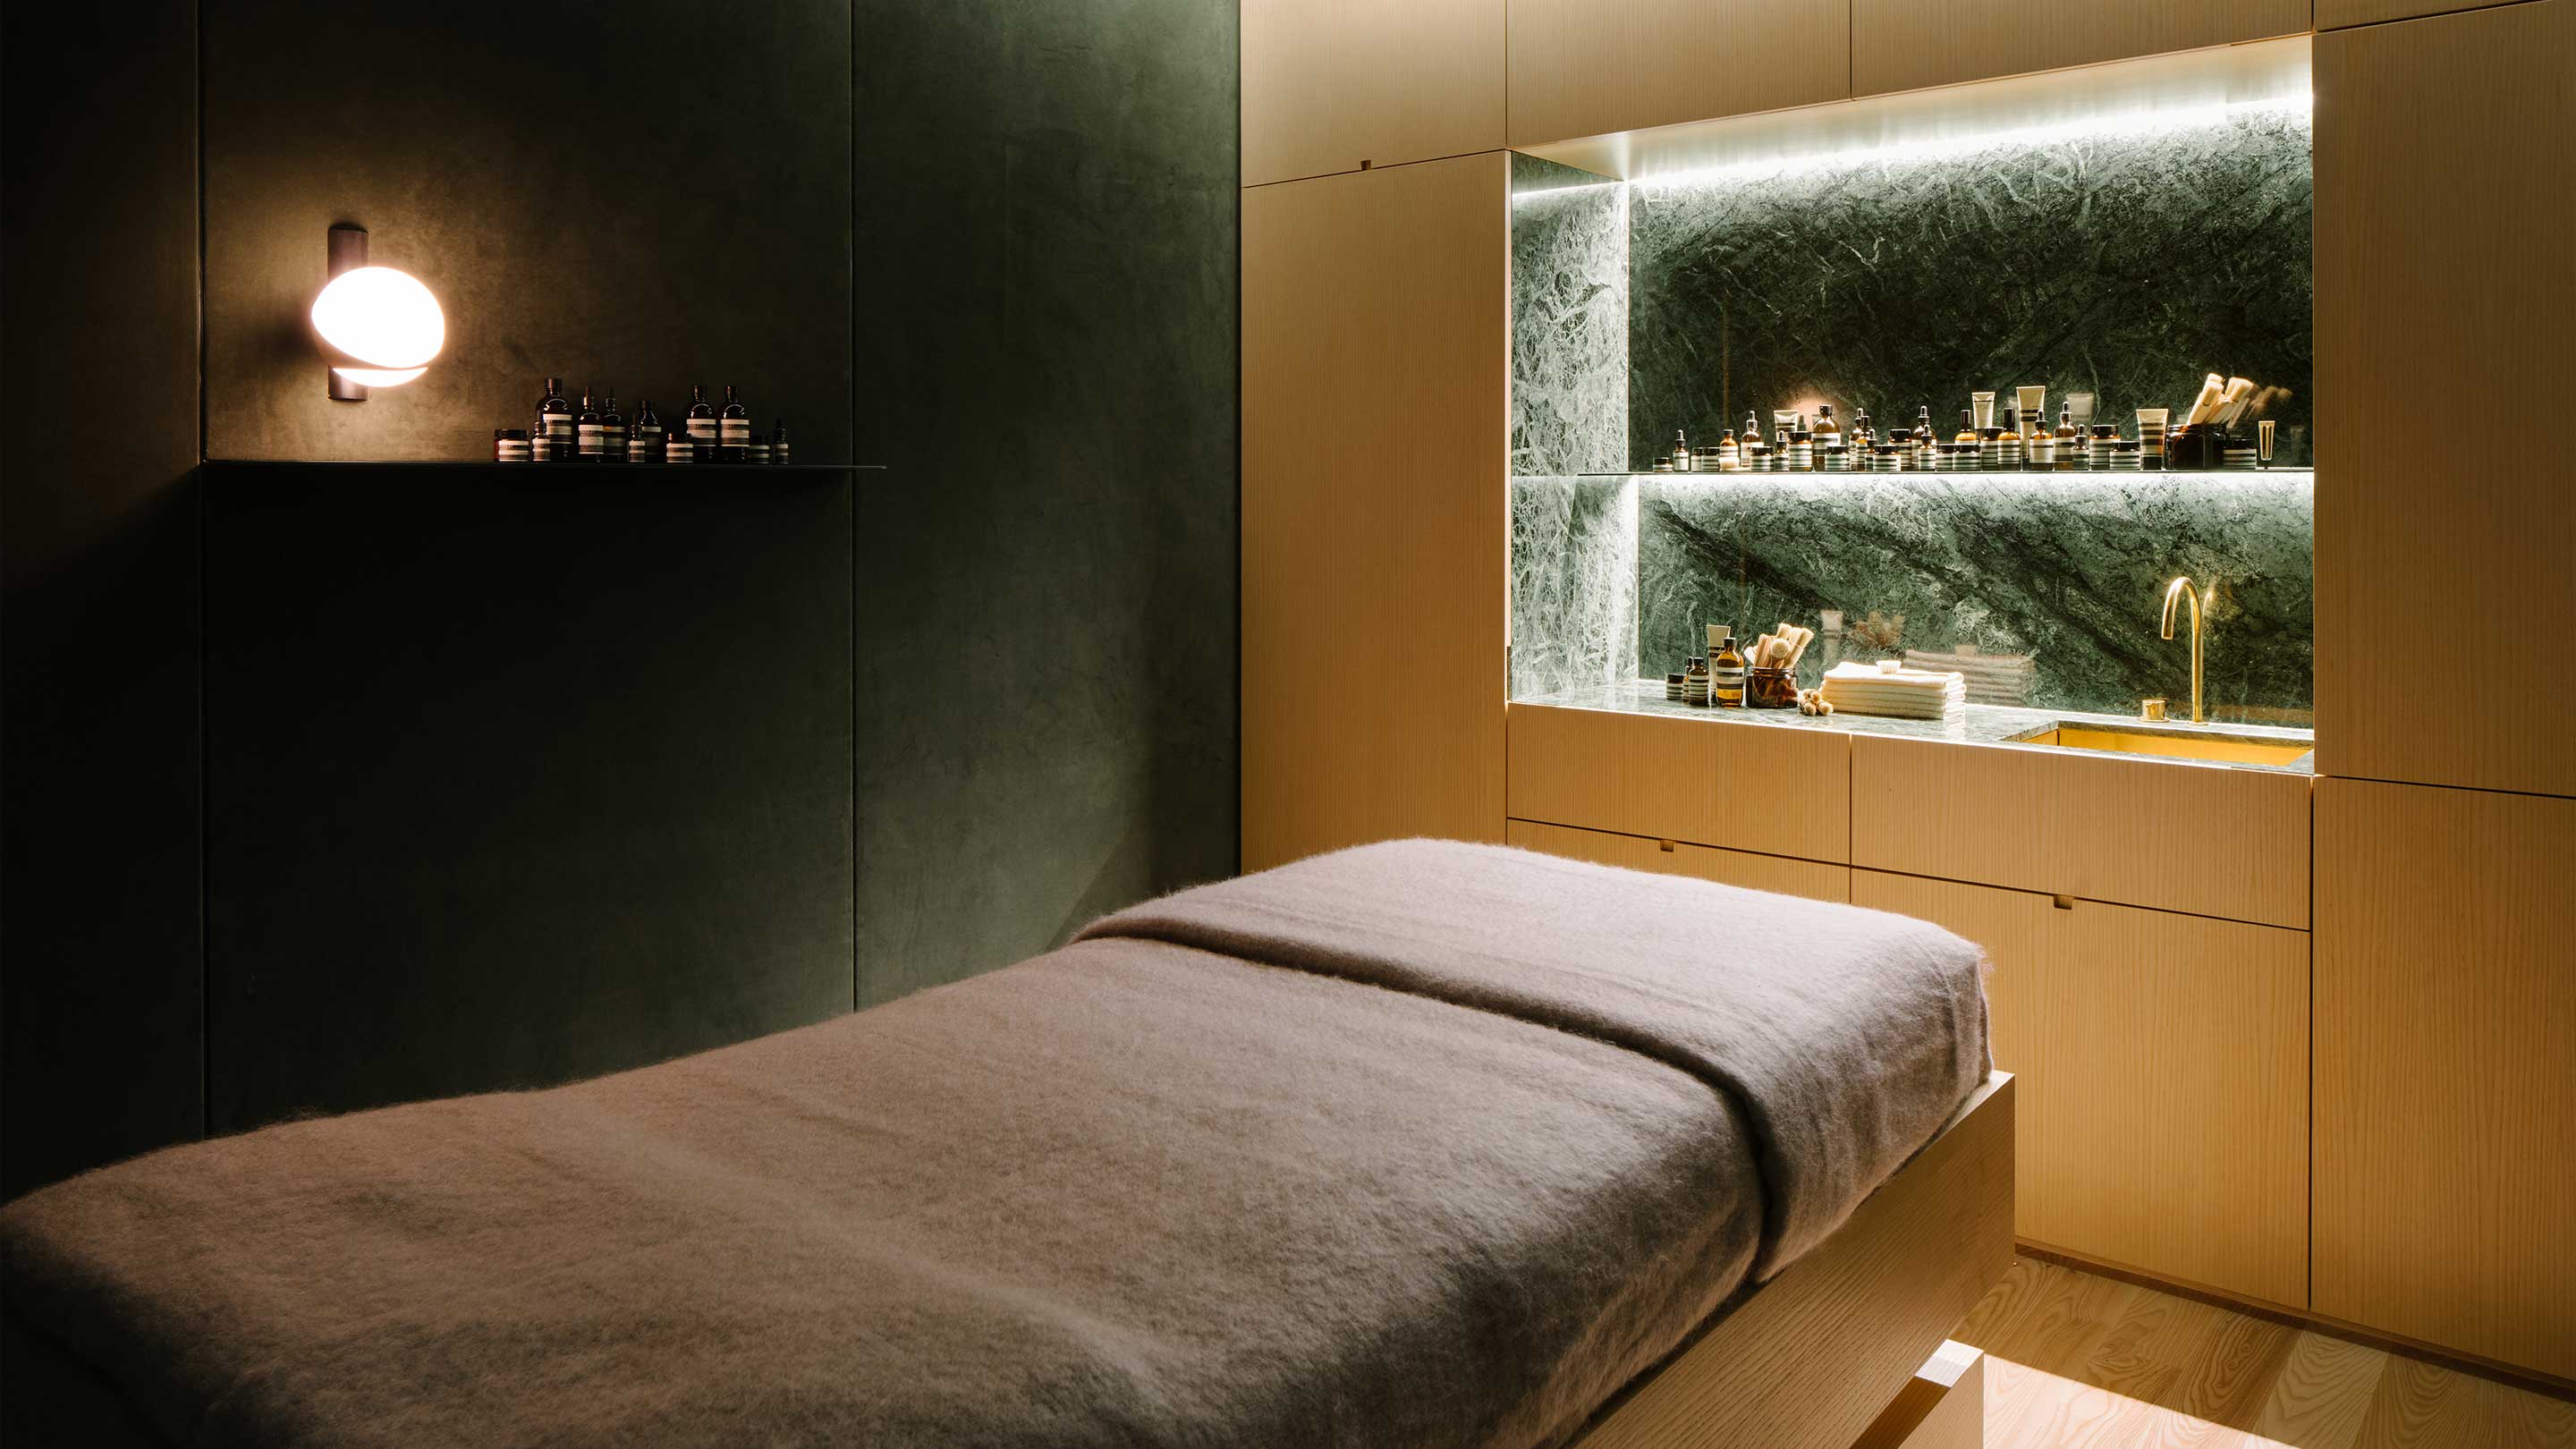 The interior of the facial room, with a bed for customers. The room features a dark green feature wall and a basin for the customer service assistant. 